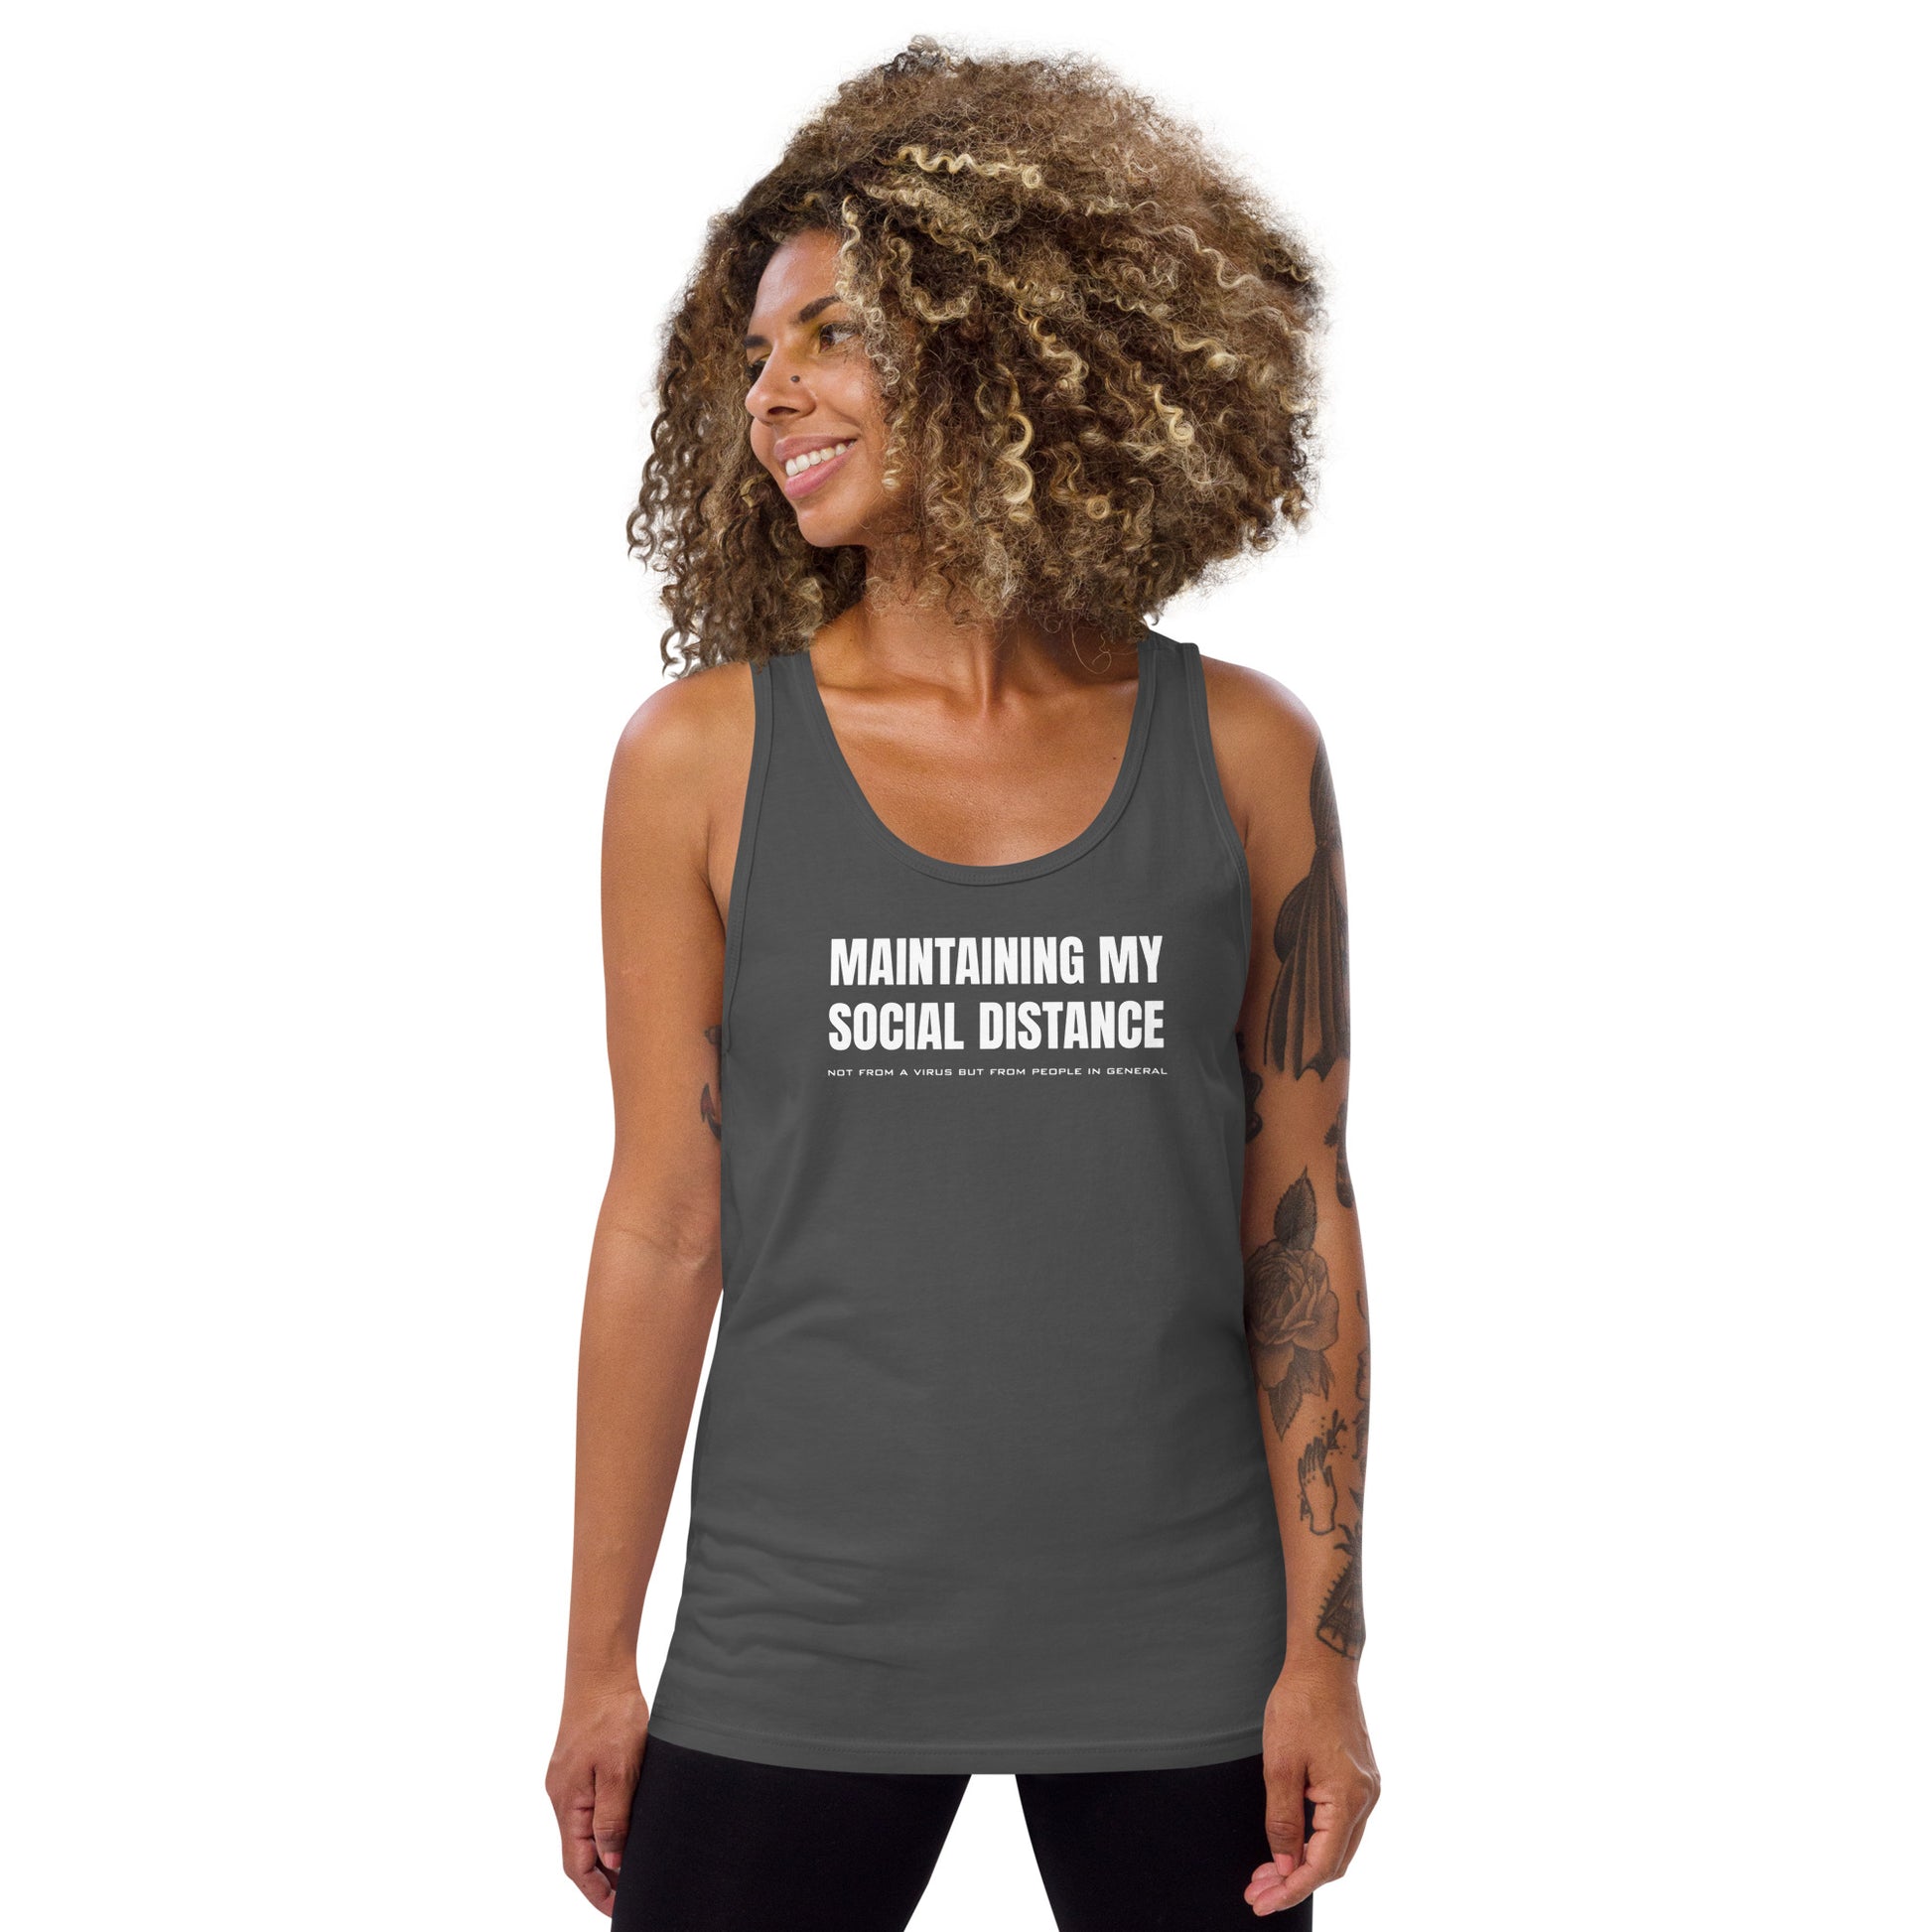 Model wearing an Asphalt (dark gray) unisex tank top with white graphic: "MAINTAINING MY SOCIAL DISTANCE not from a virus but from people in general"